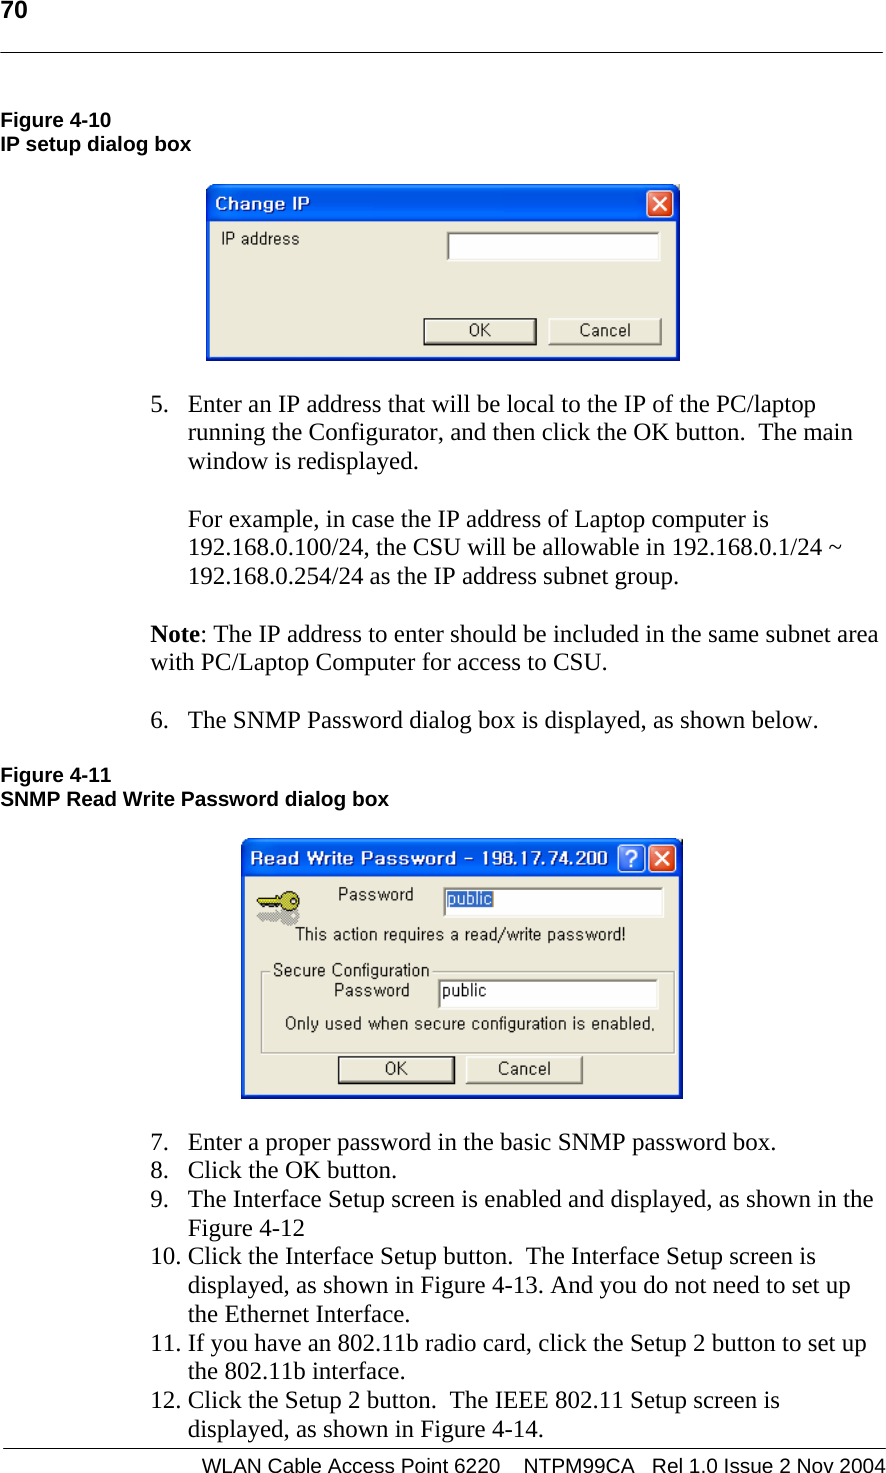   70  WLAN Cable Access Point 6220    NTPM99CA   Rel 1.0 Issue 2 Nov 2004 Figure 4-10 IP setup dialog box    5. Enter an IP address that will be local to the IP of the PC/laptop running the Configurator, and then click the OK button.  The main window is redisplayed.  For example, in case the IP address of Laptop computer is 192.168.0.100/24, the CSU will be allowable in 192.168.0.1/24 ~ 192.168.0.254/24 as the IP address subnet group.  Note: The IP address to enter should be included in the same subnet area with PC/Laptop Computer for access to CSU.   6. The SNMP Password dialog box is displayed, as shown below.   Figure 4-11 SNMP Read Write Password dialog box    7. Enter a proper password in the basic SNMP password box. 8. Click the OK button. 9. The Interface Setup screen is enabled and displayed, as shown in the Figure 4-12 10. Click the Interface Setup button.  The Interface Setup screen is displayed, as shown in Figure 4-13. And you do not need to set up the Ethernet Interface.  11. If you have an 802.11b radio card, click the Setup 2 button to set up the 802.11b interface. 12. Click the Setup 2 button.  The IEEE 802.11 Setup screen is displayed, as shown in Figure 4-14. 